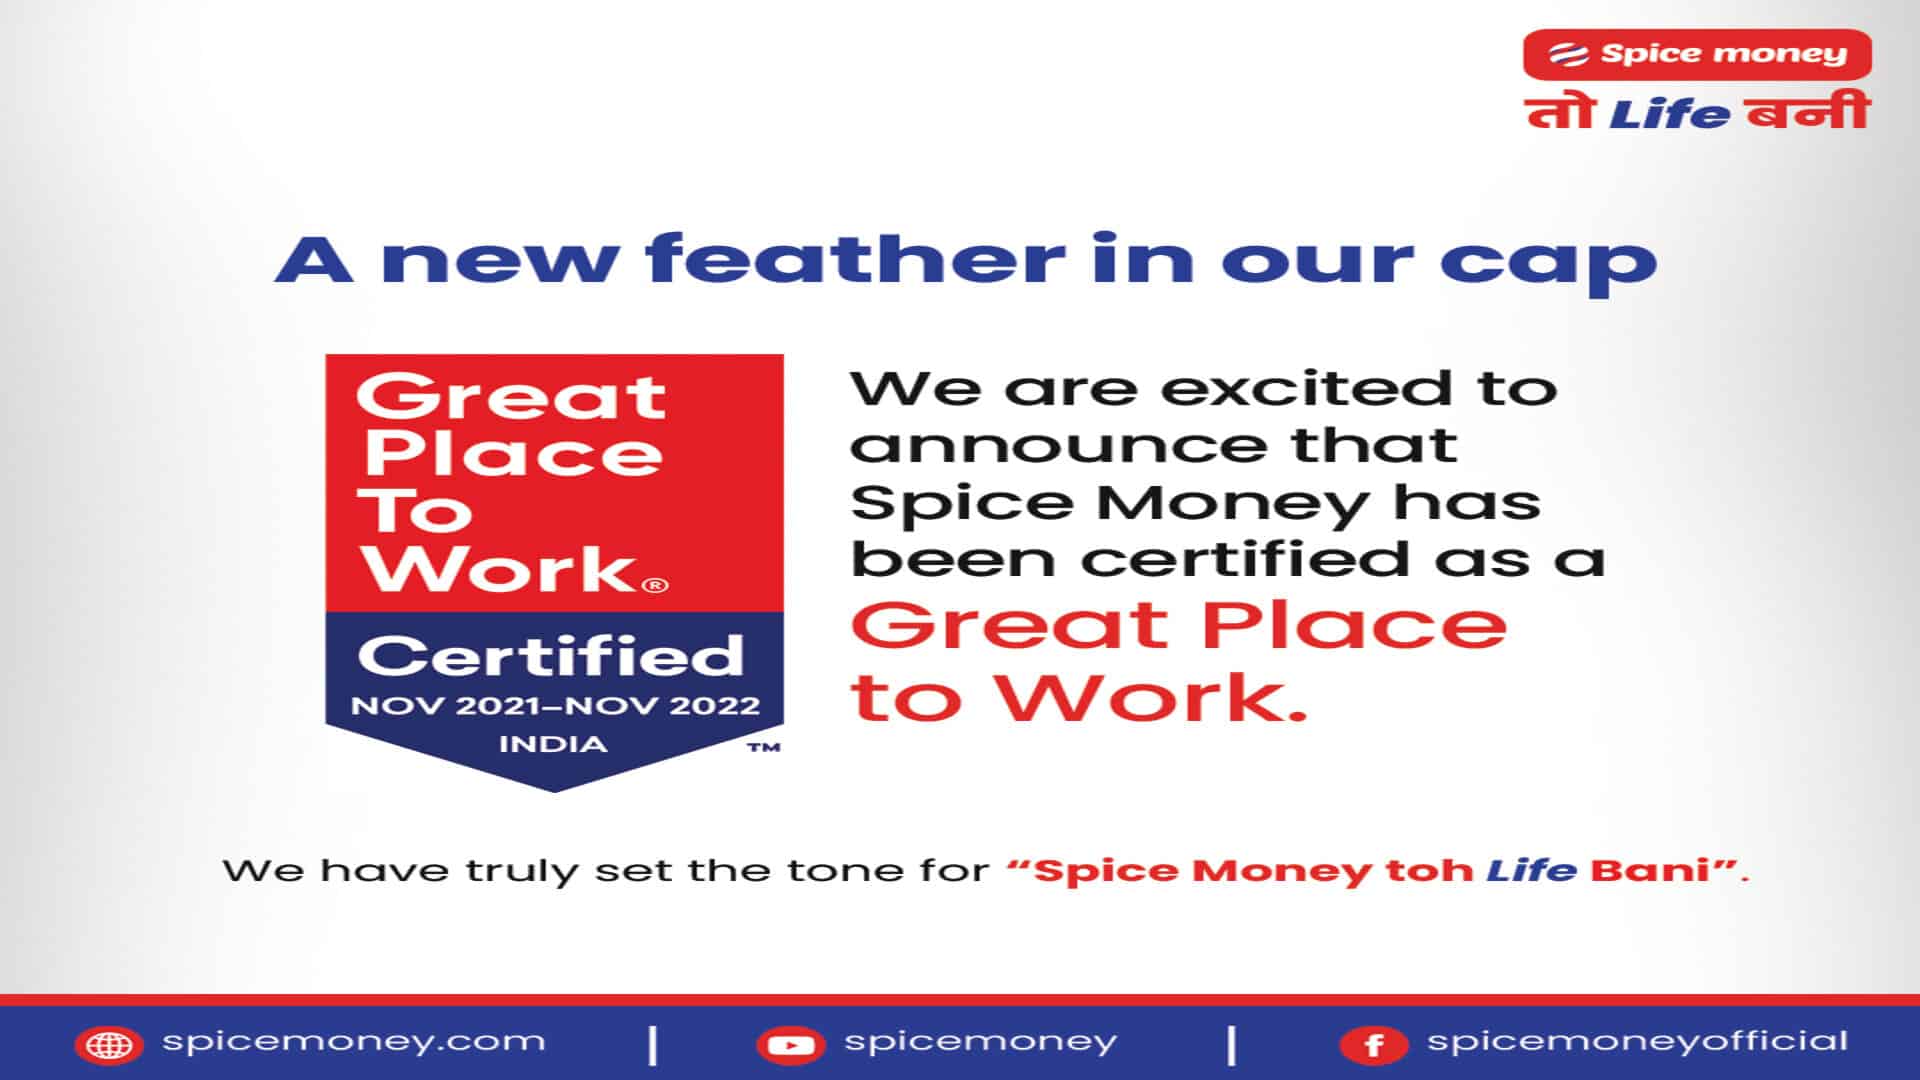 Spice Money earns prestigious Great Place to Work certification